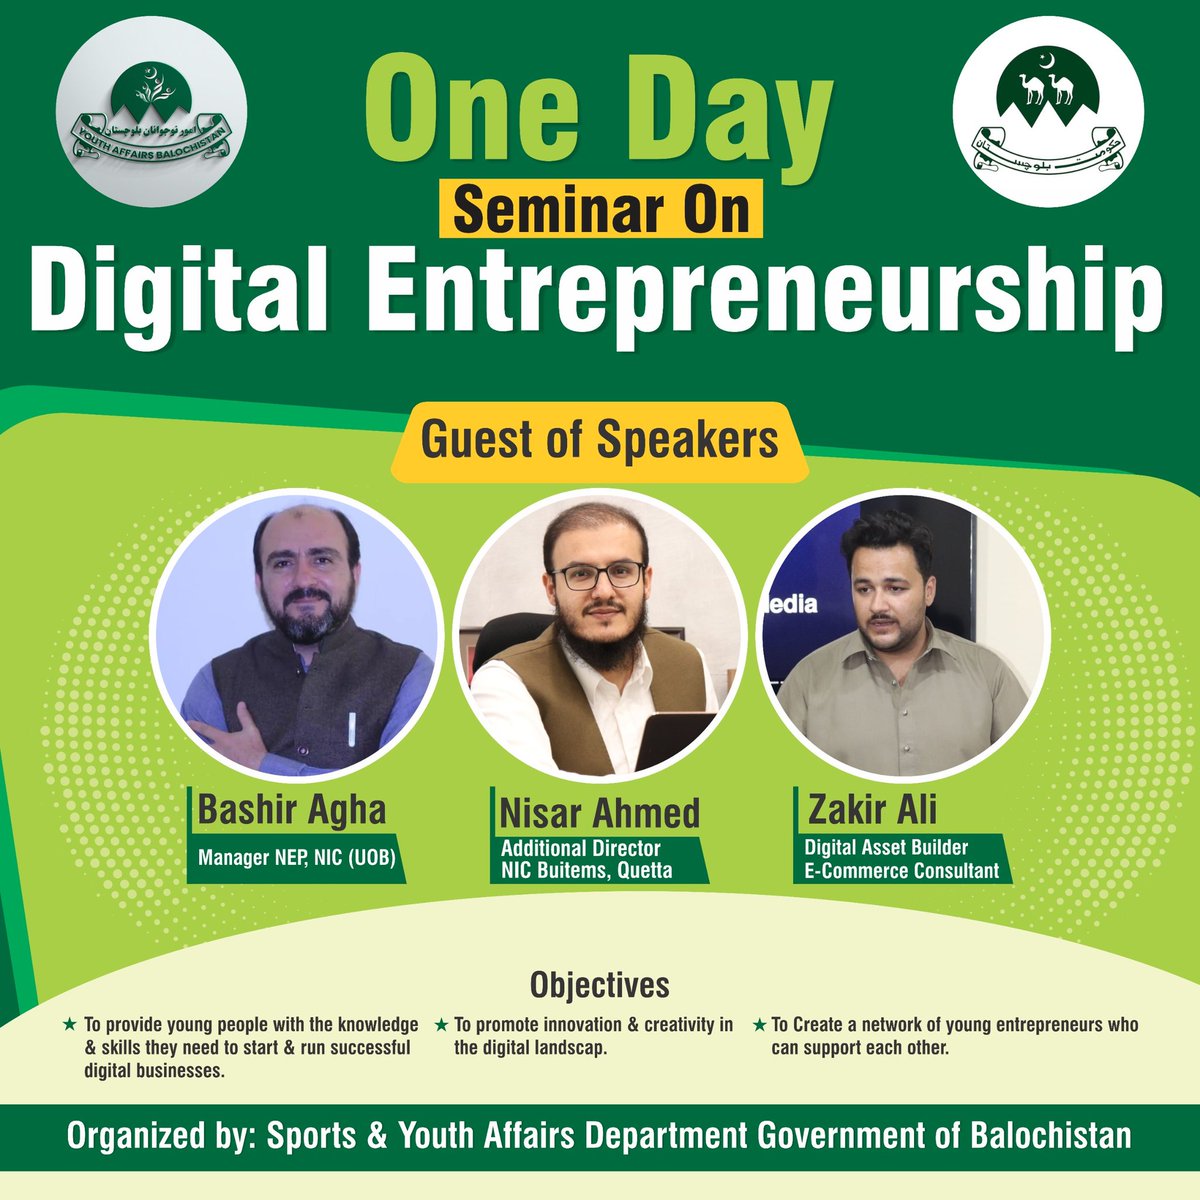 Please join us on Monday 20th November 2023 at 10:00 AM to 2:00 PM in Directorate of Youth Affairs Auditorium Ayub Stadium Quetta.